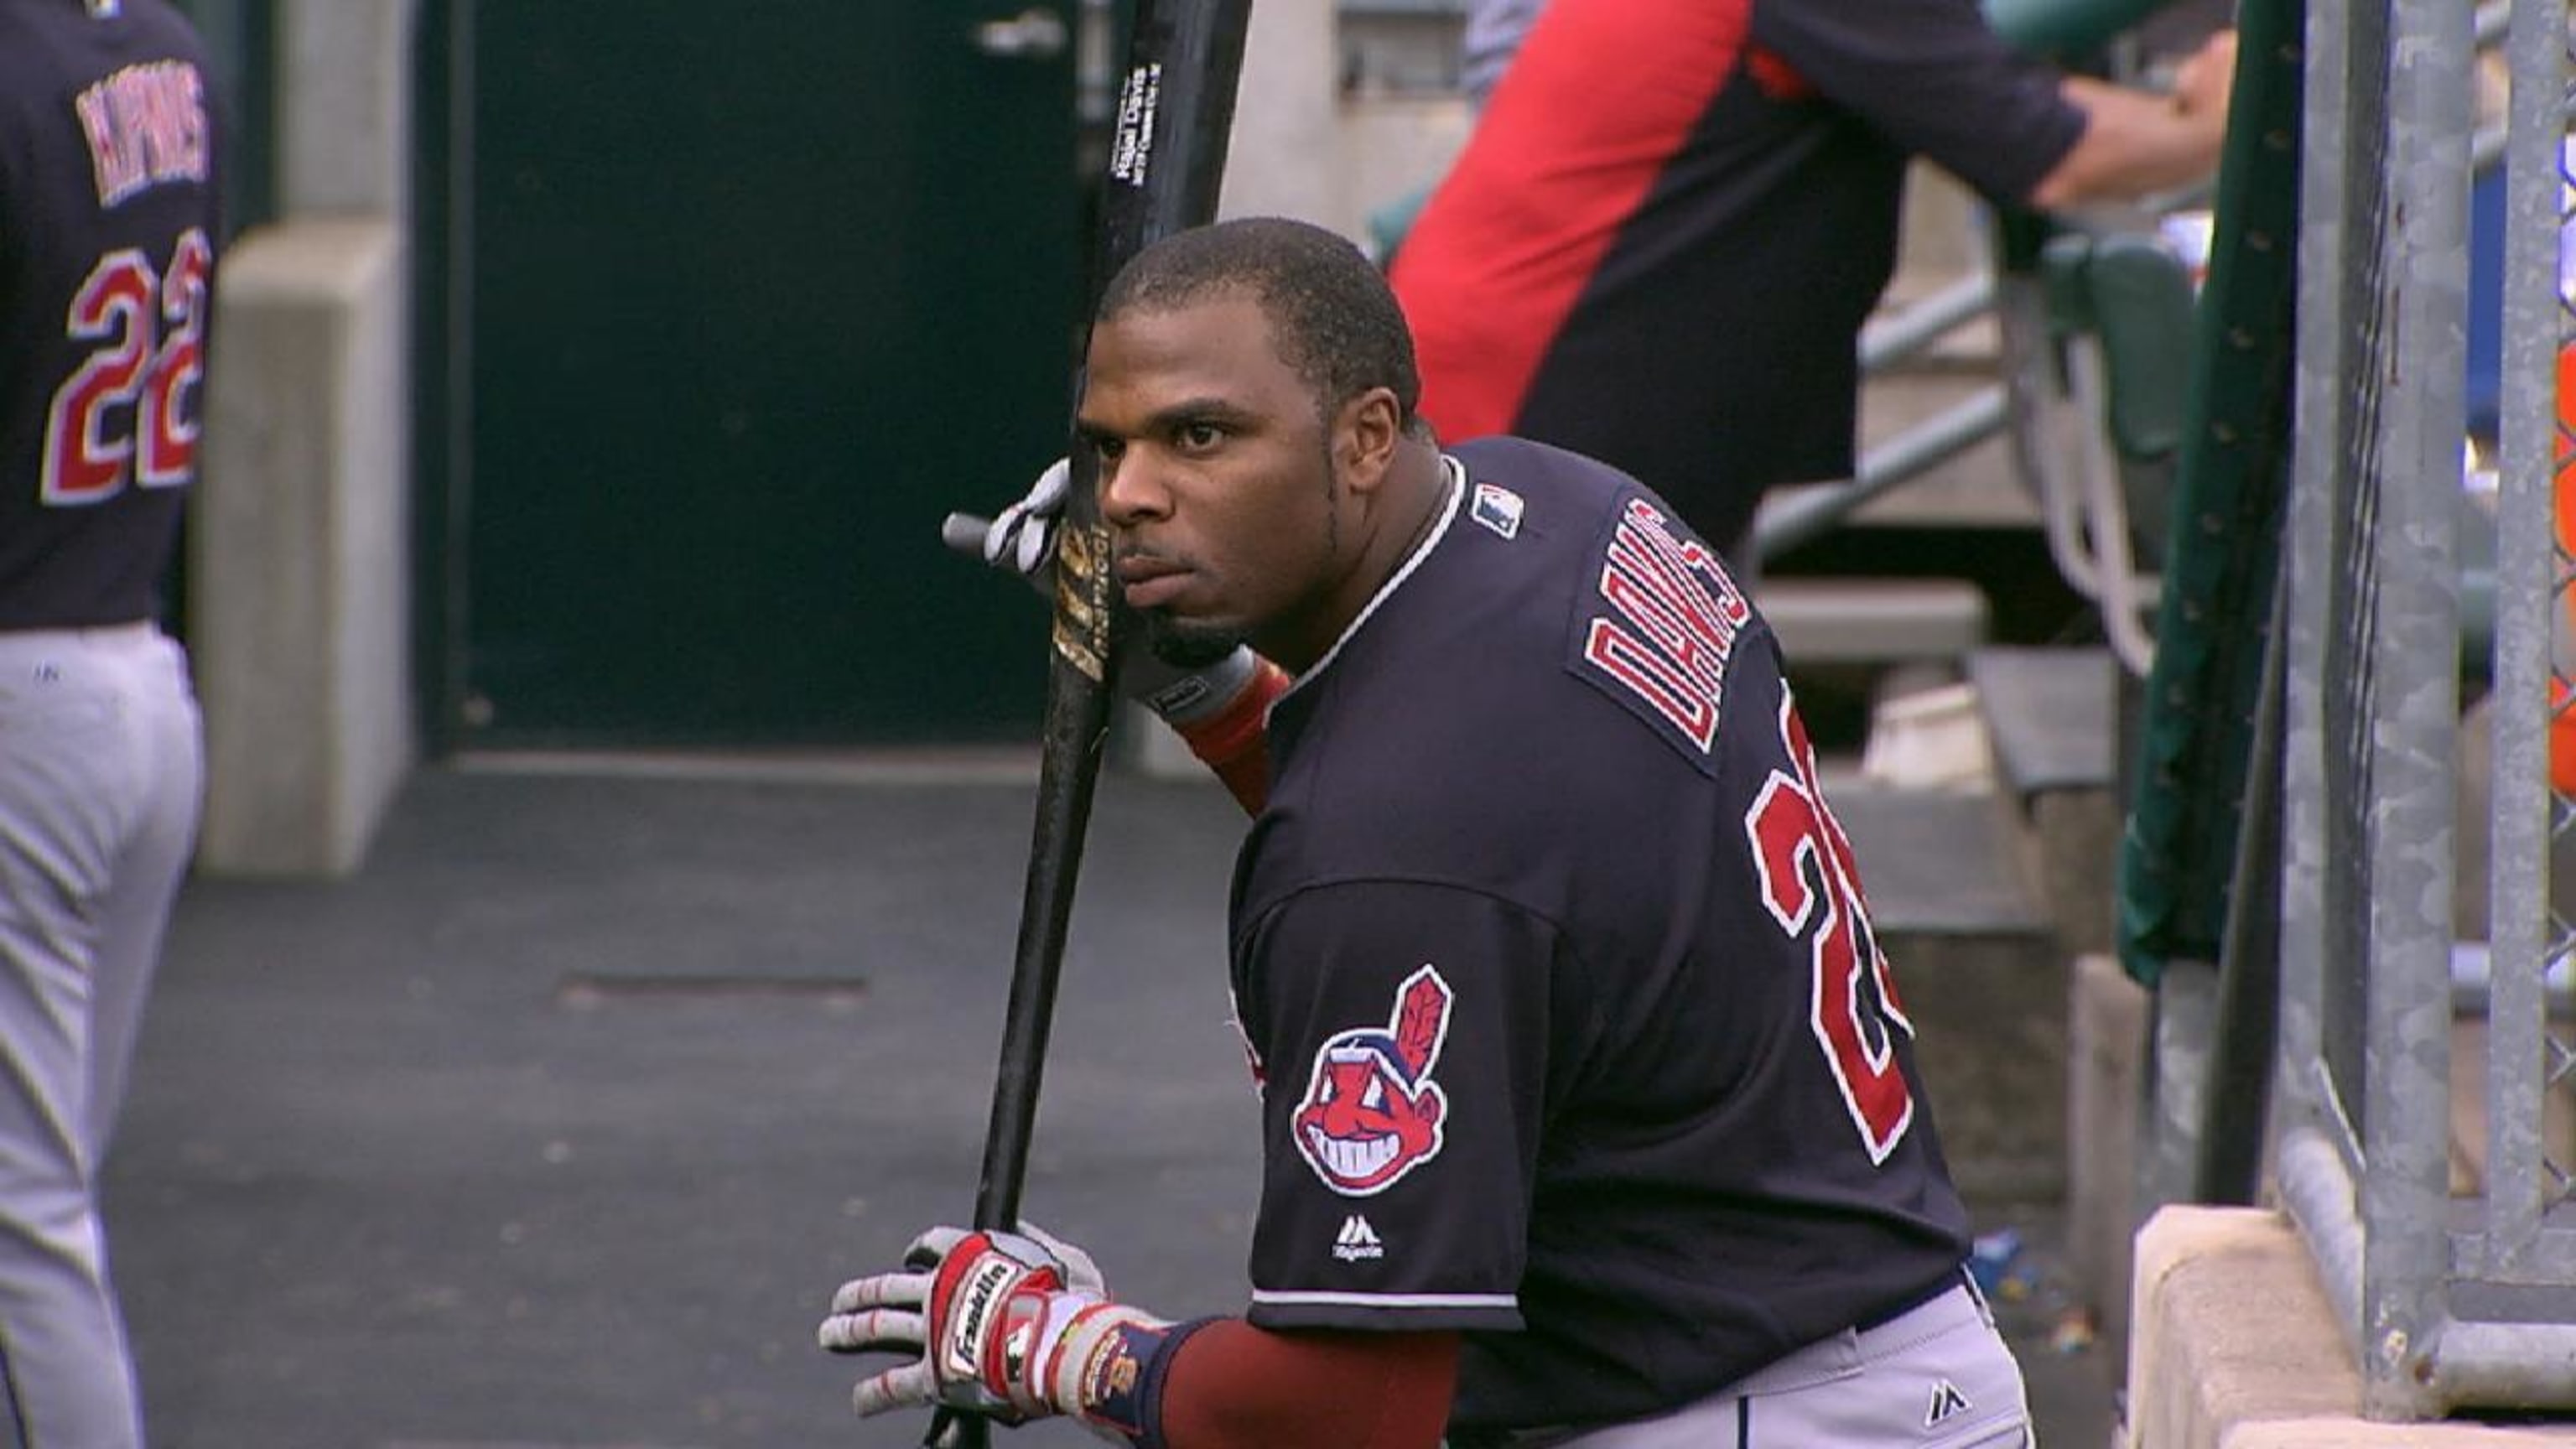 Rajai Davis proved he has the sharpest batting eye by bunting